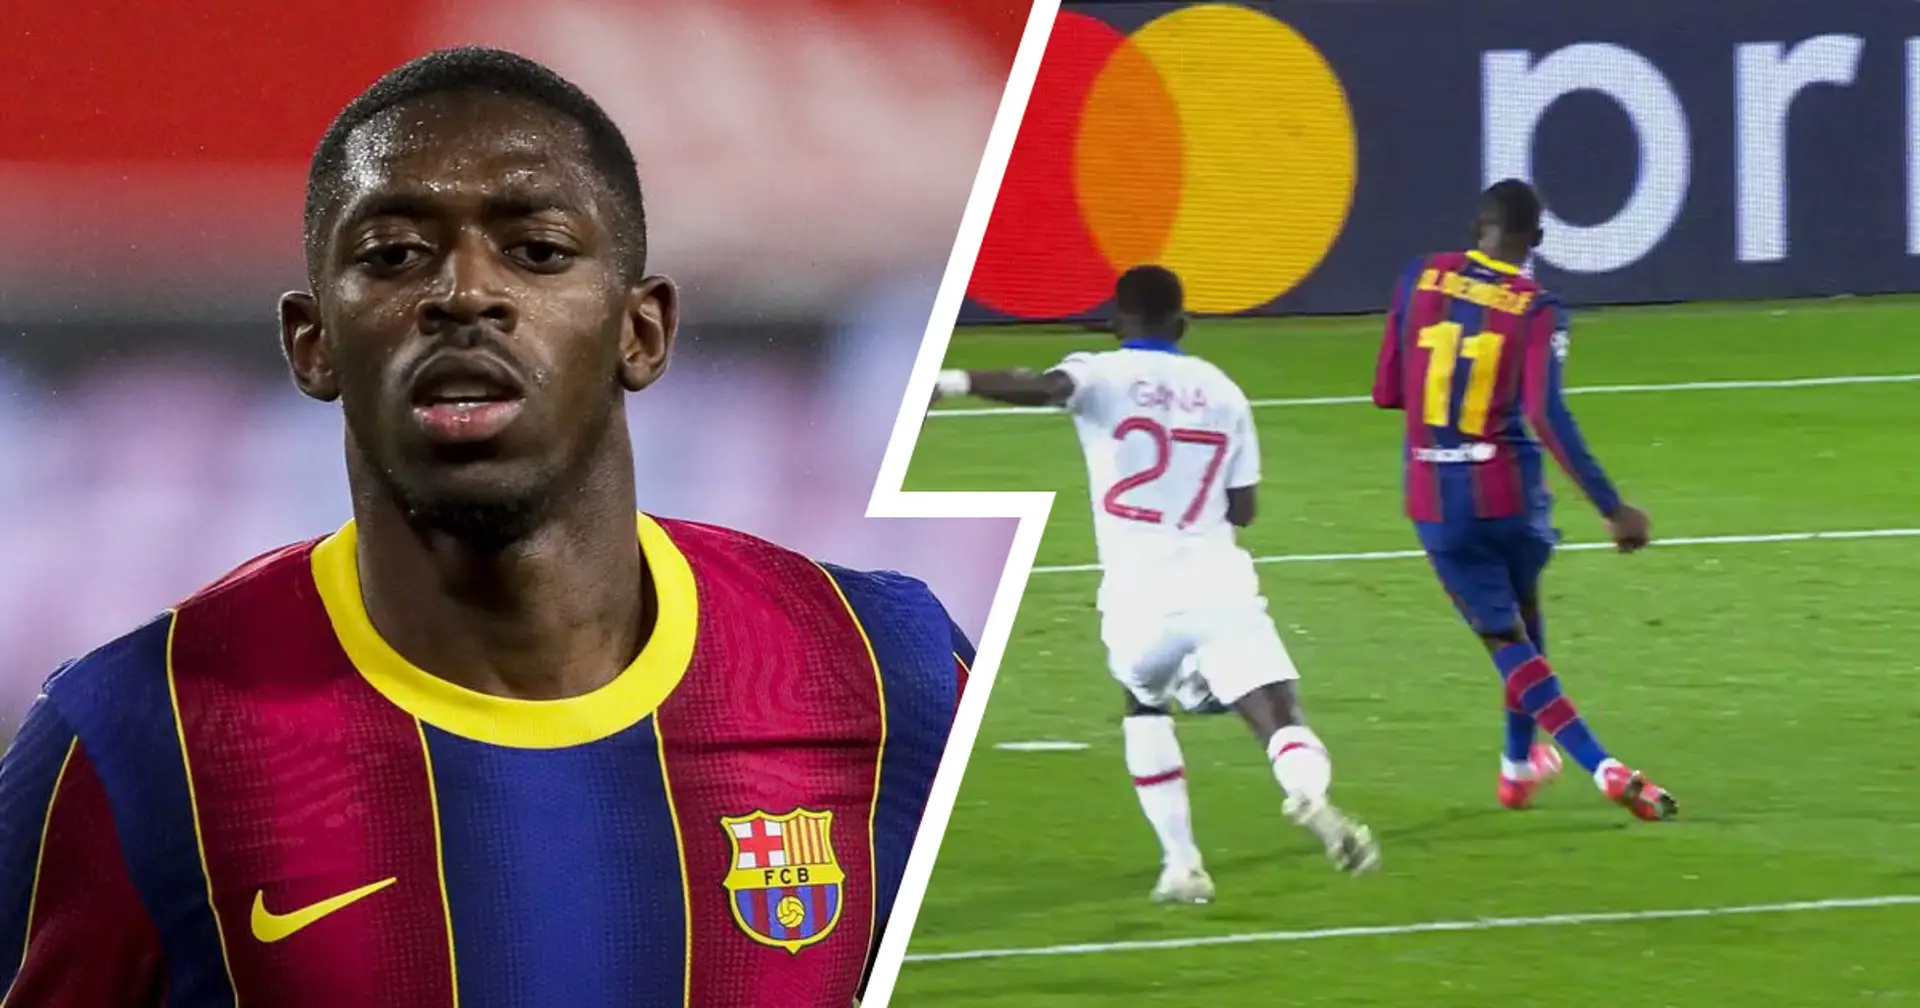 'Sell Dembele if we get €50-60m': Barca global fan community call for Ousmane's exit after poor PSG showing